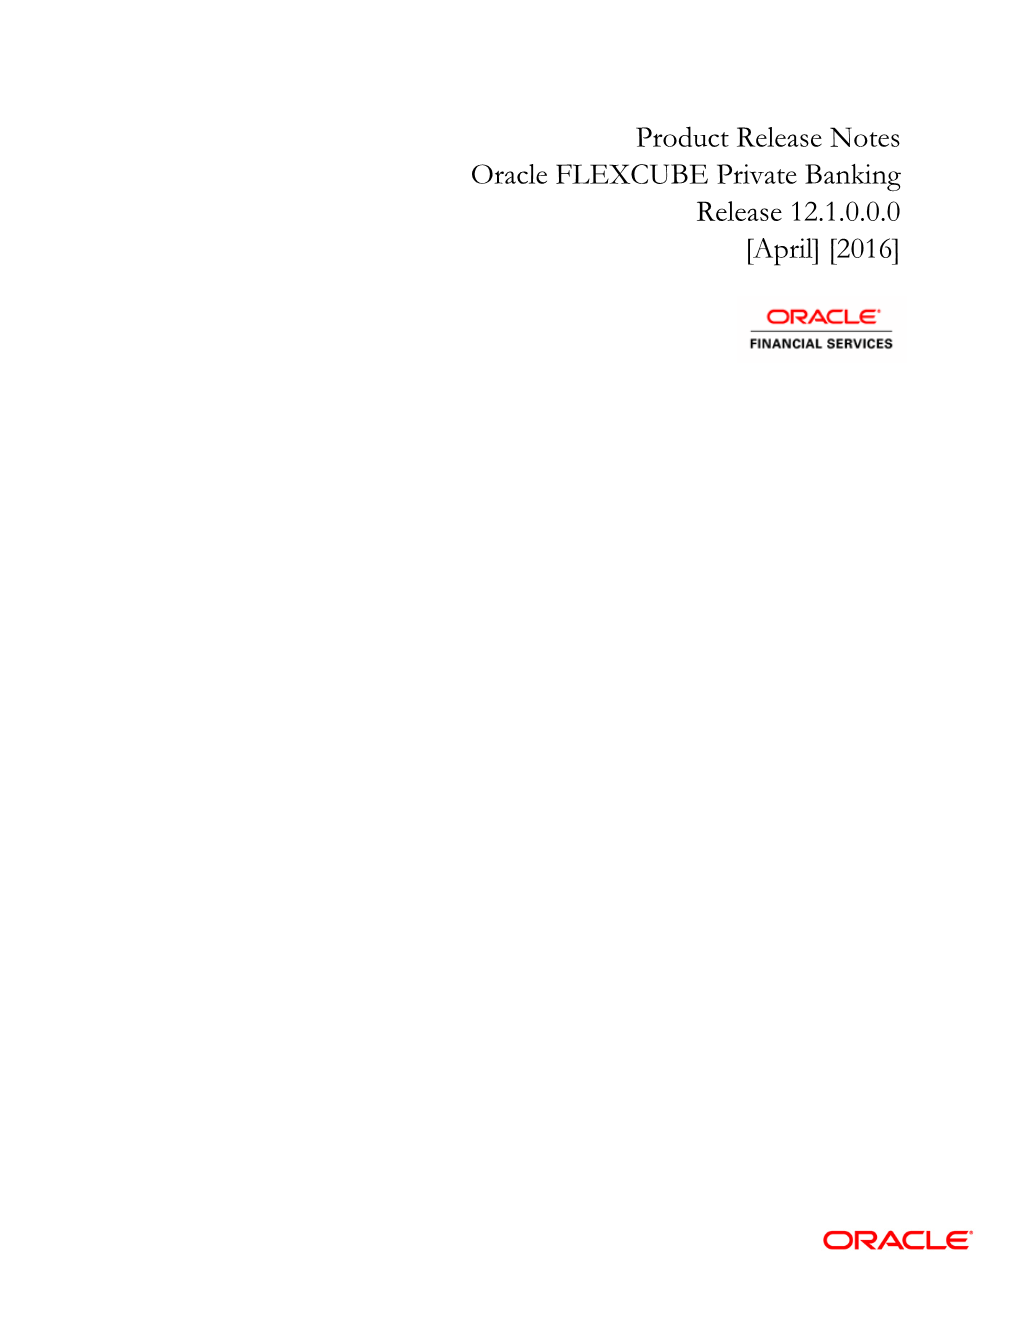 Oracle FLEXCUBE Private Banking Release Notes